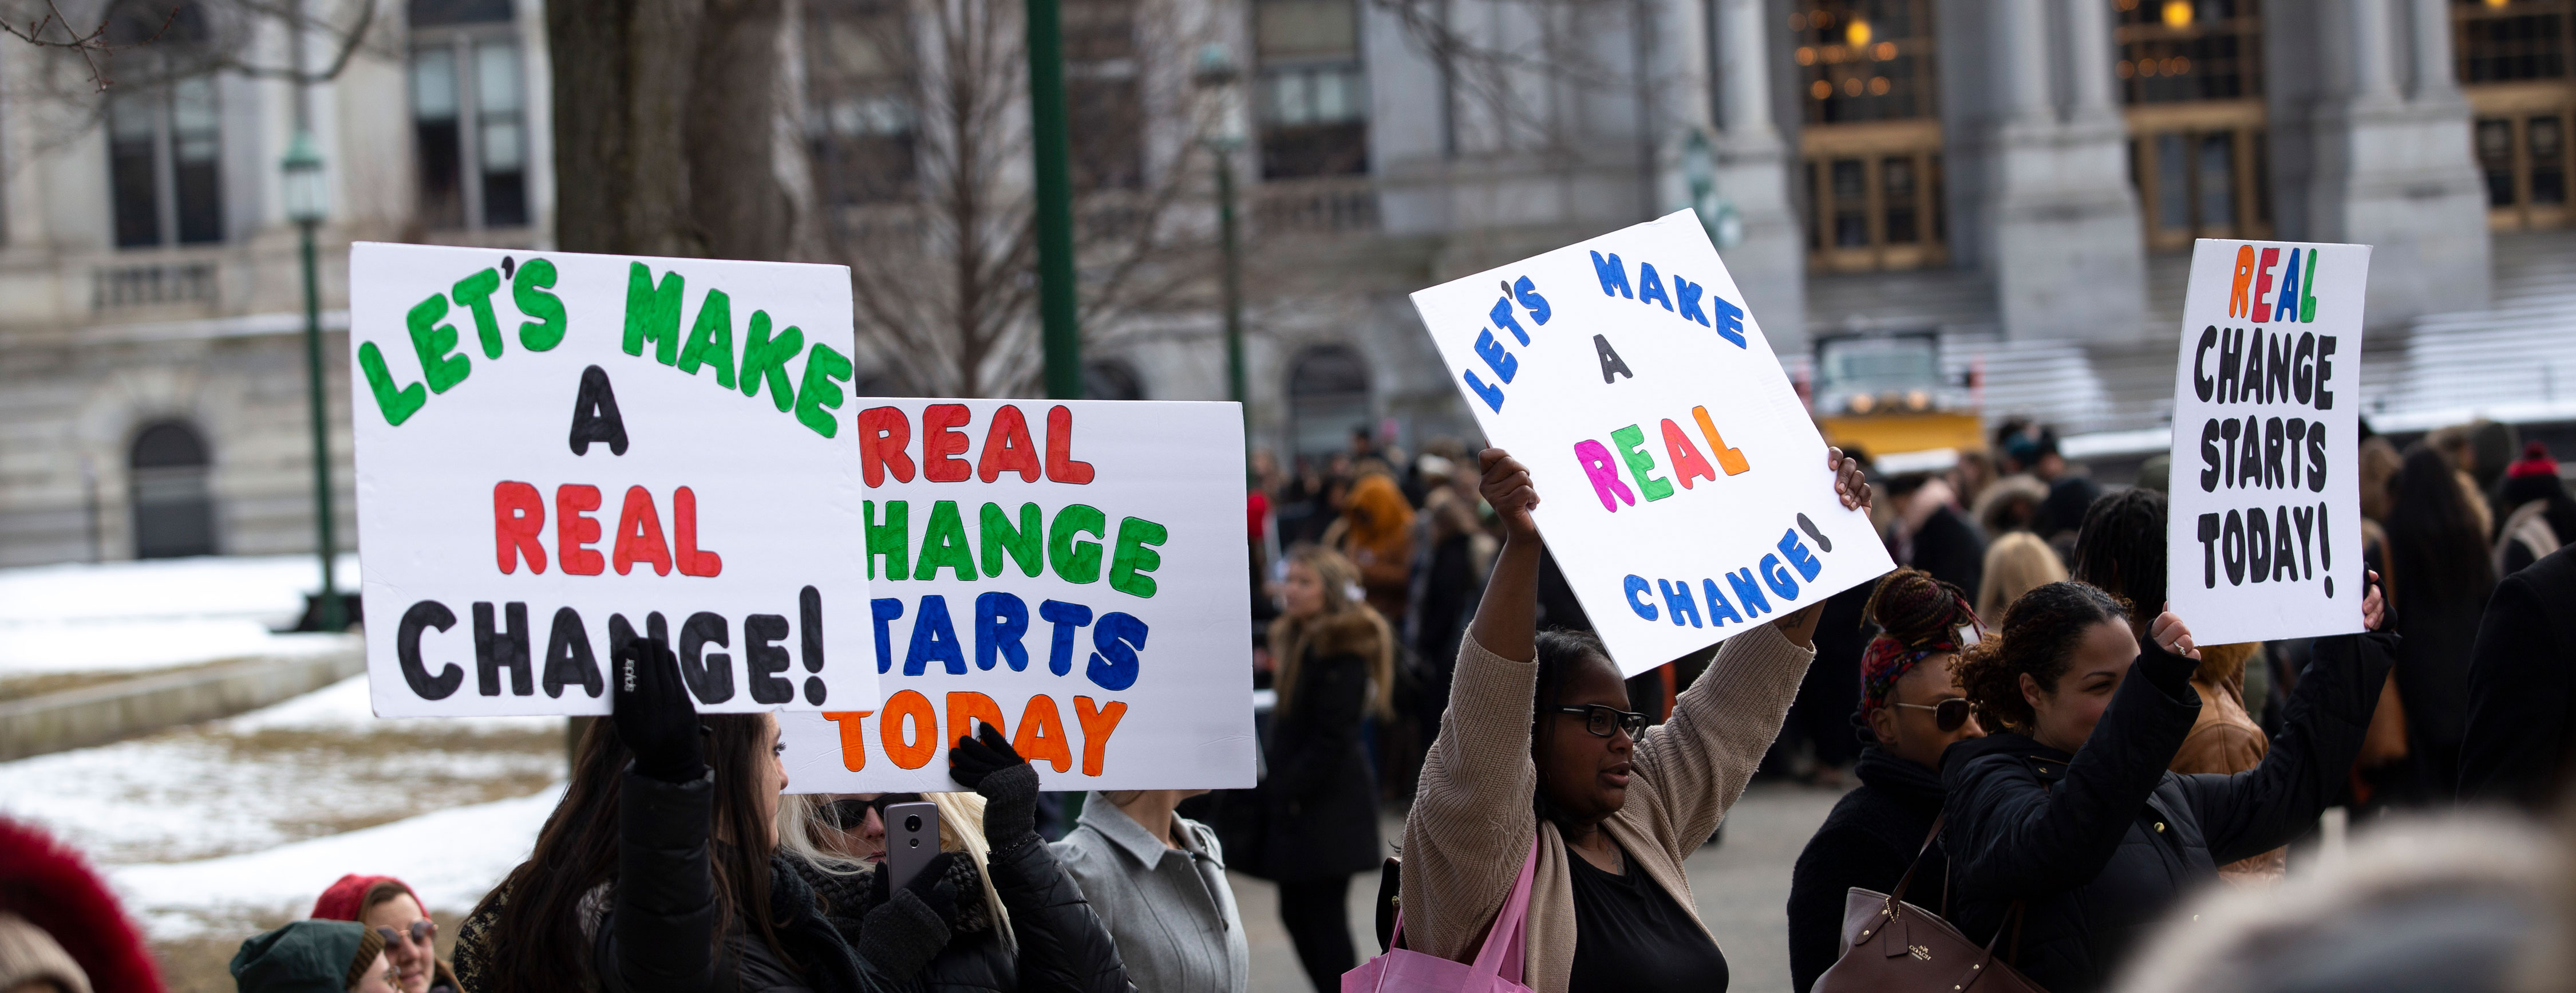 Social work students hold up posters that say, "Let's make real change," and "Real change starts today," at a gathering outside the New York State Capitol.